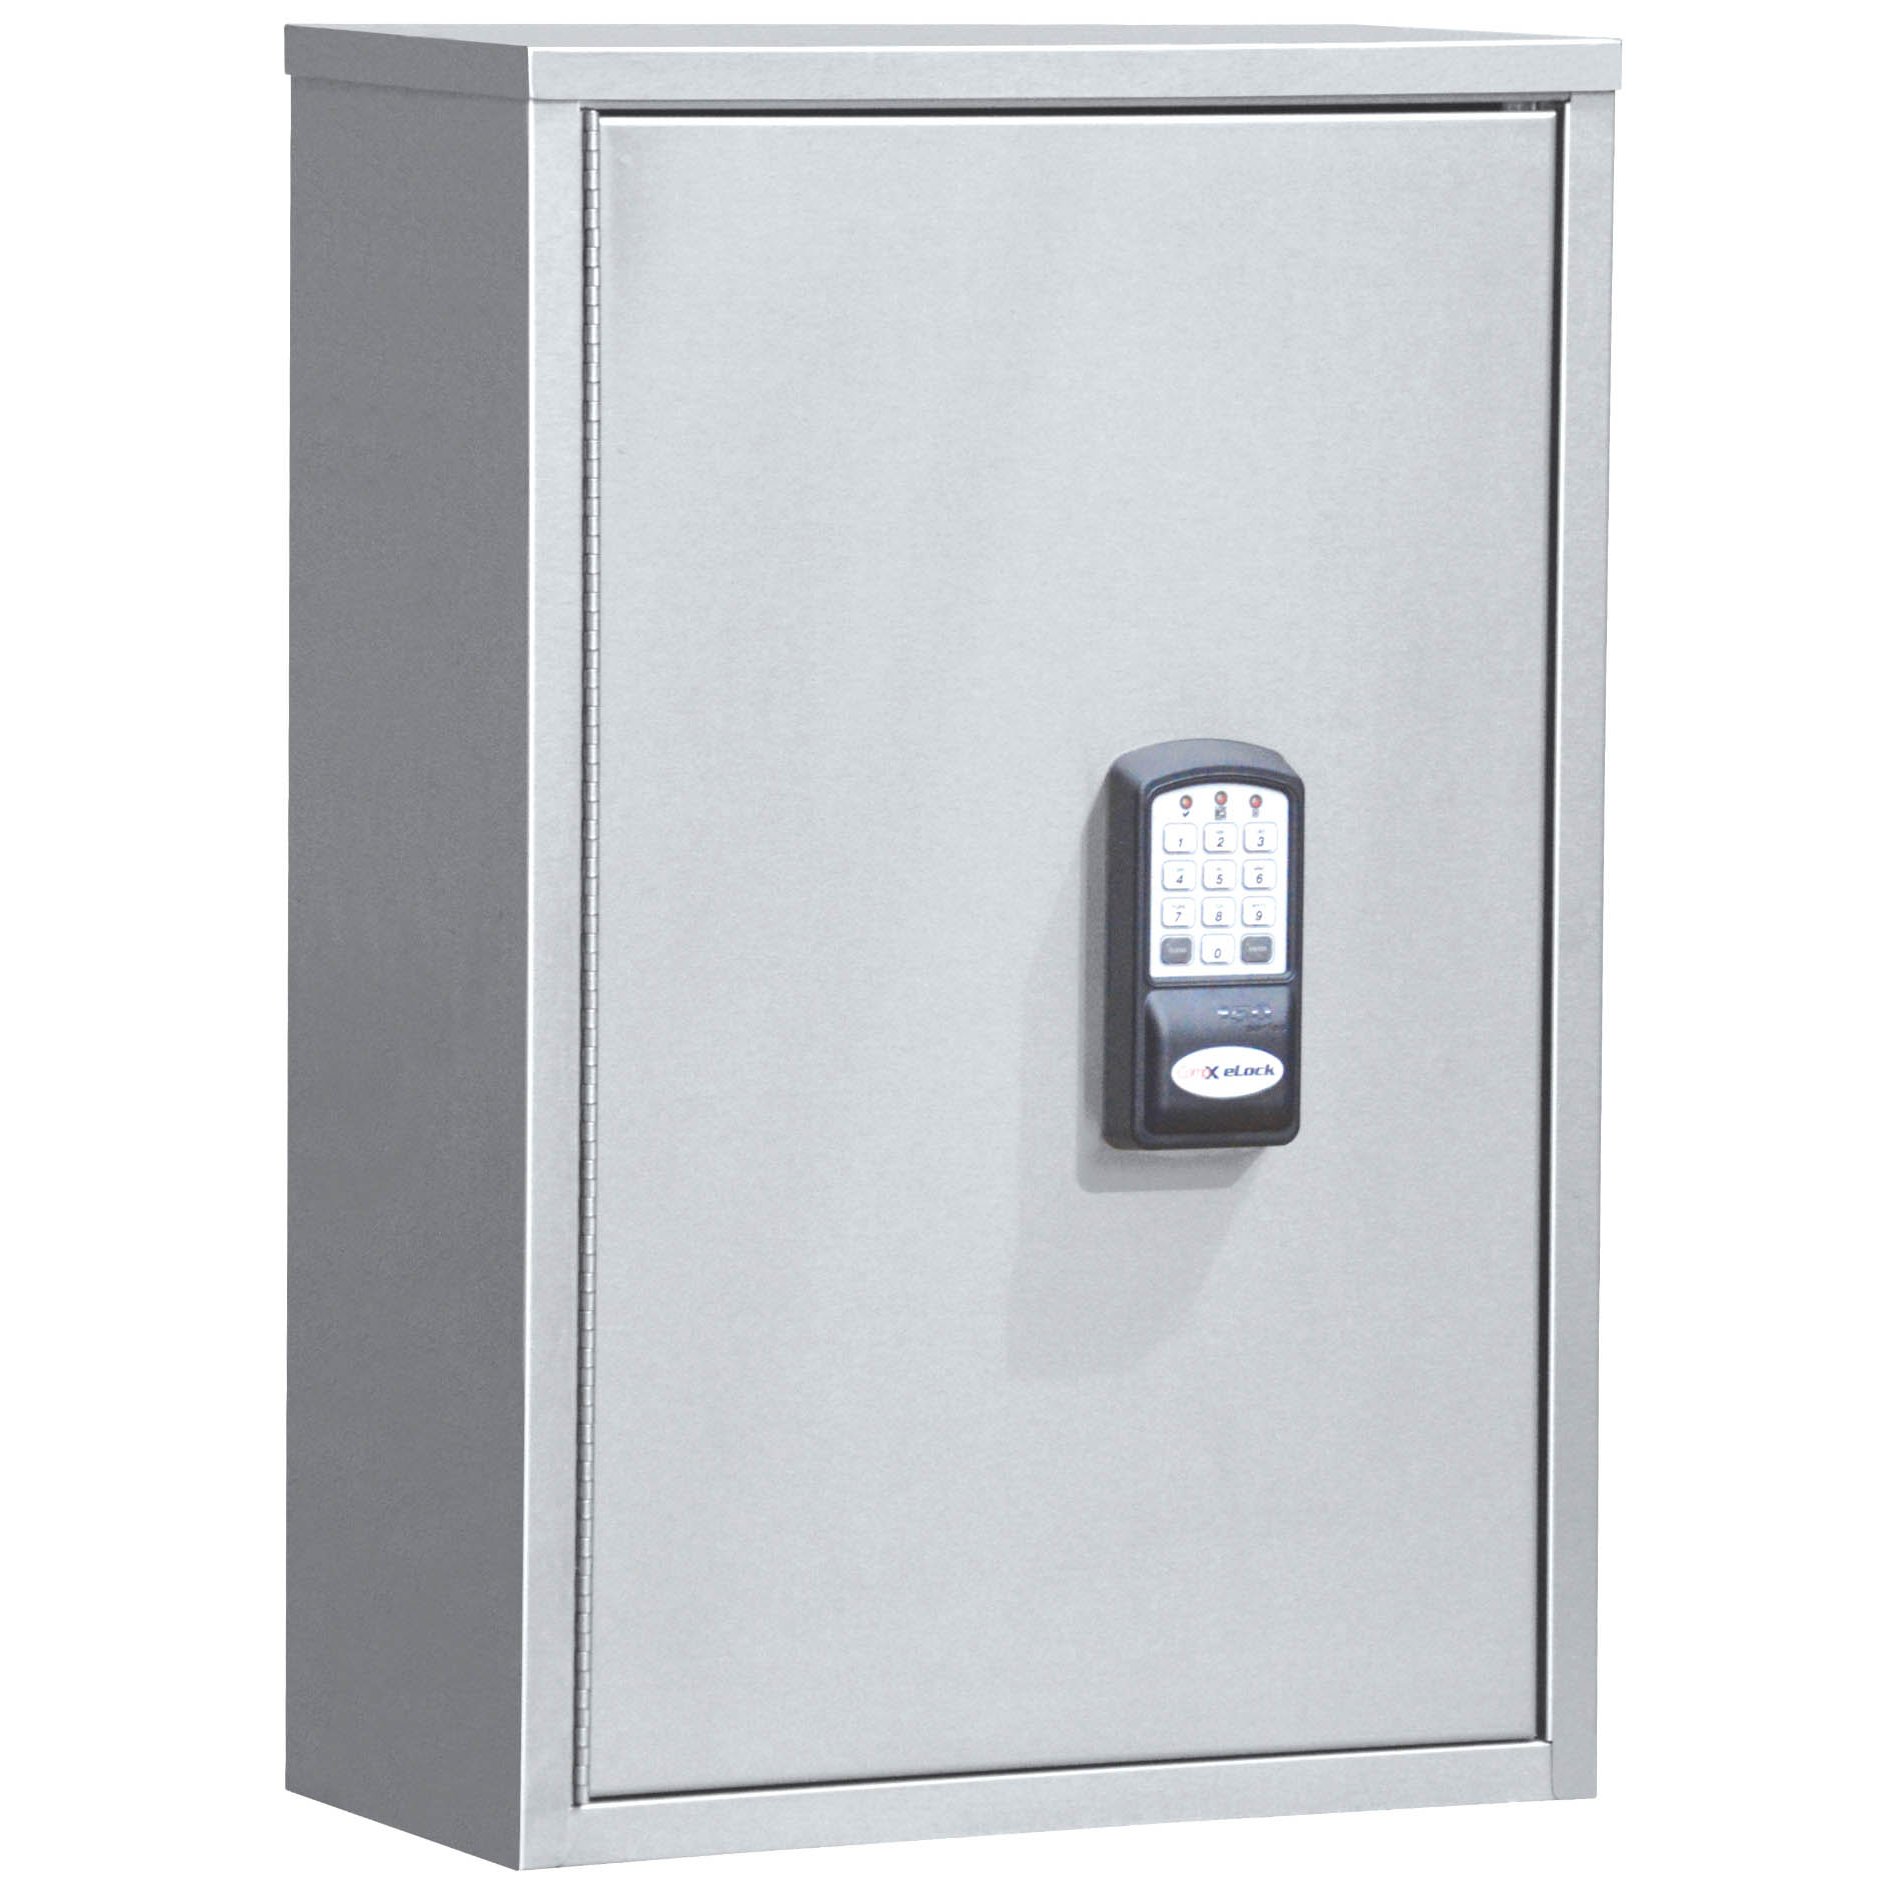 Refrigerator Lock Boxes-Perfect for Home and Professional Settings - Omnimed